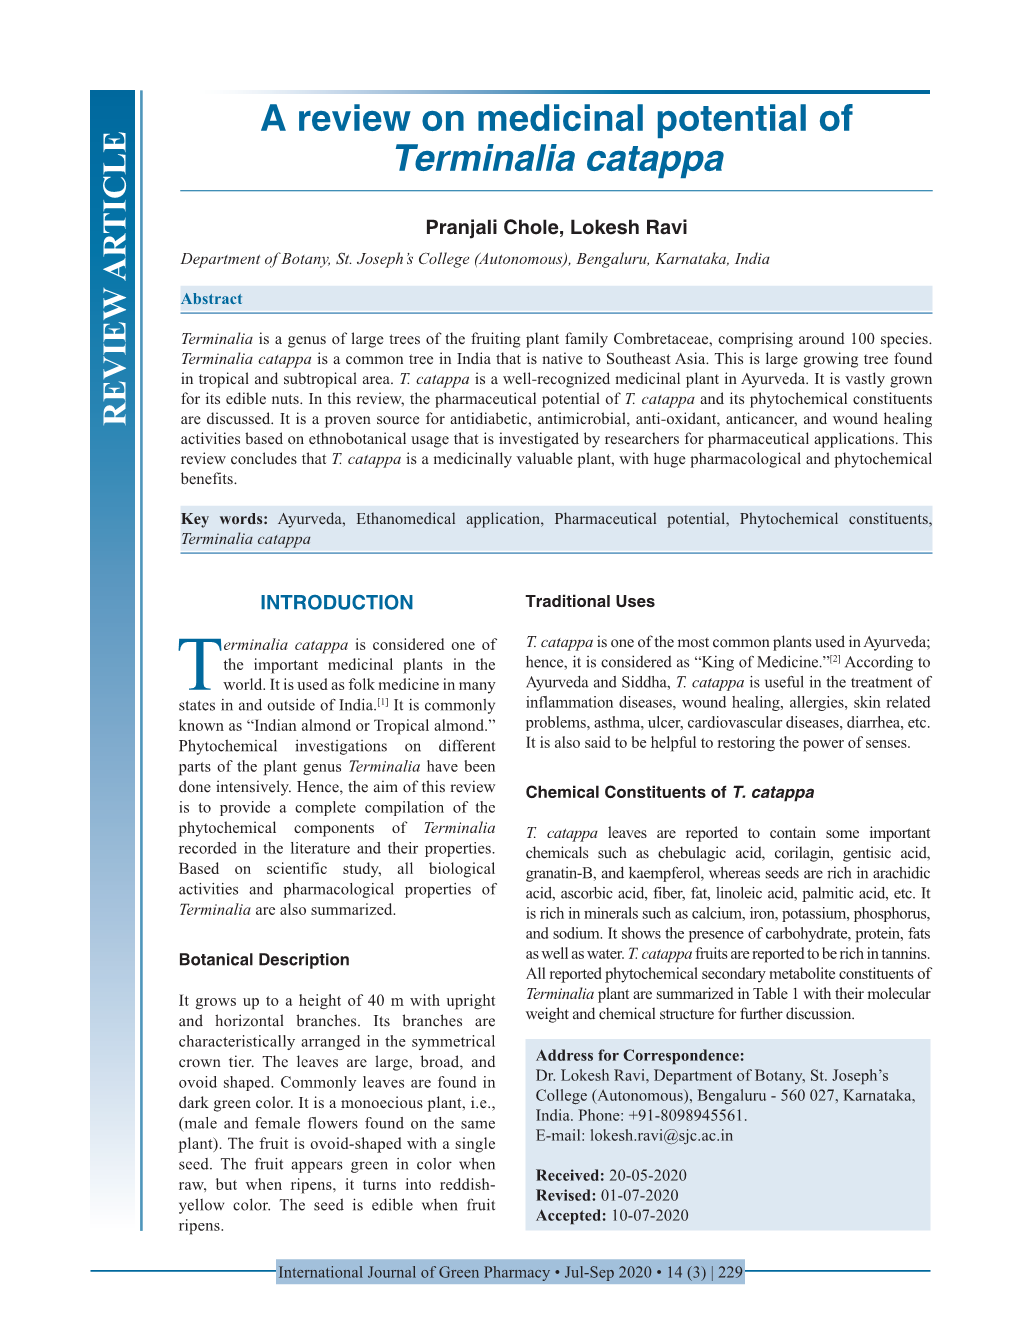 A Review on Medicinal Potential of Terminalia Catappa